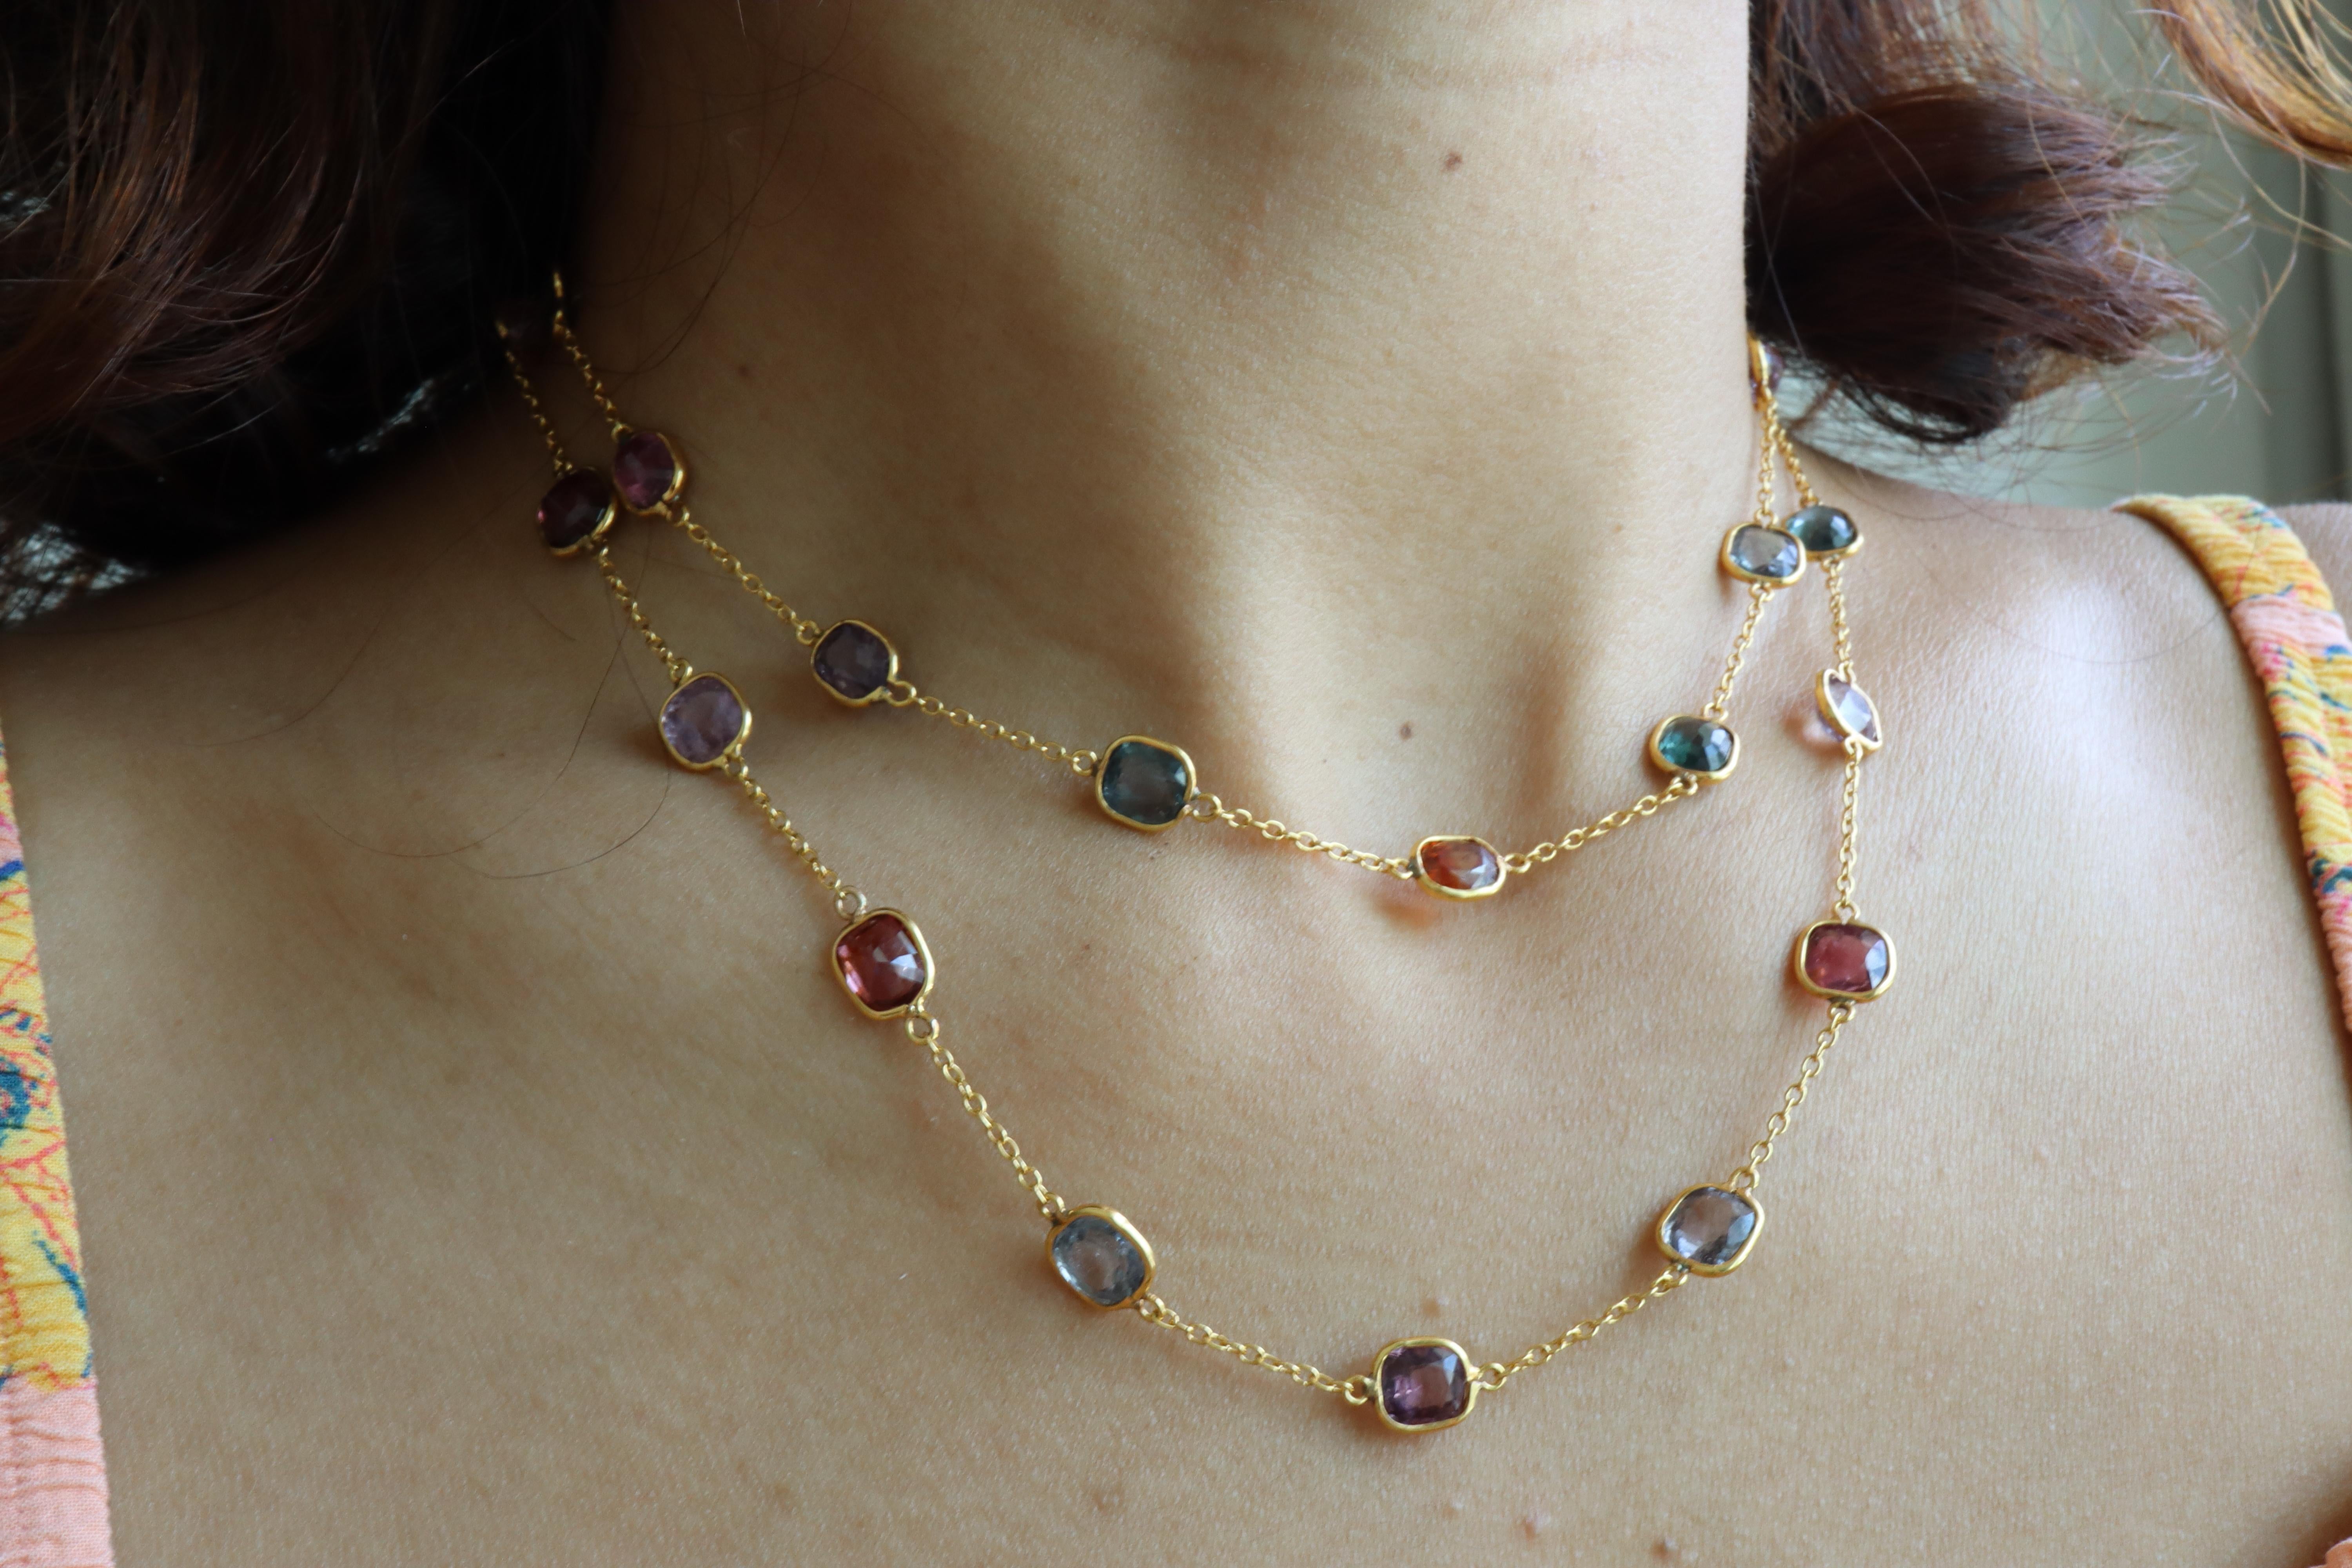 Artisan Total 41.69Ct - 31pcs of Natural Burma Spinel Yard Necklace in 18k solid gold